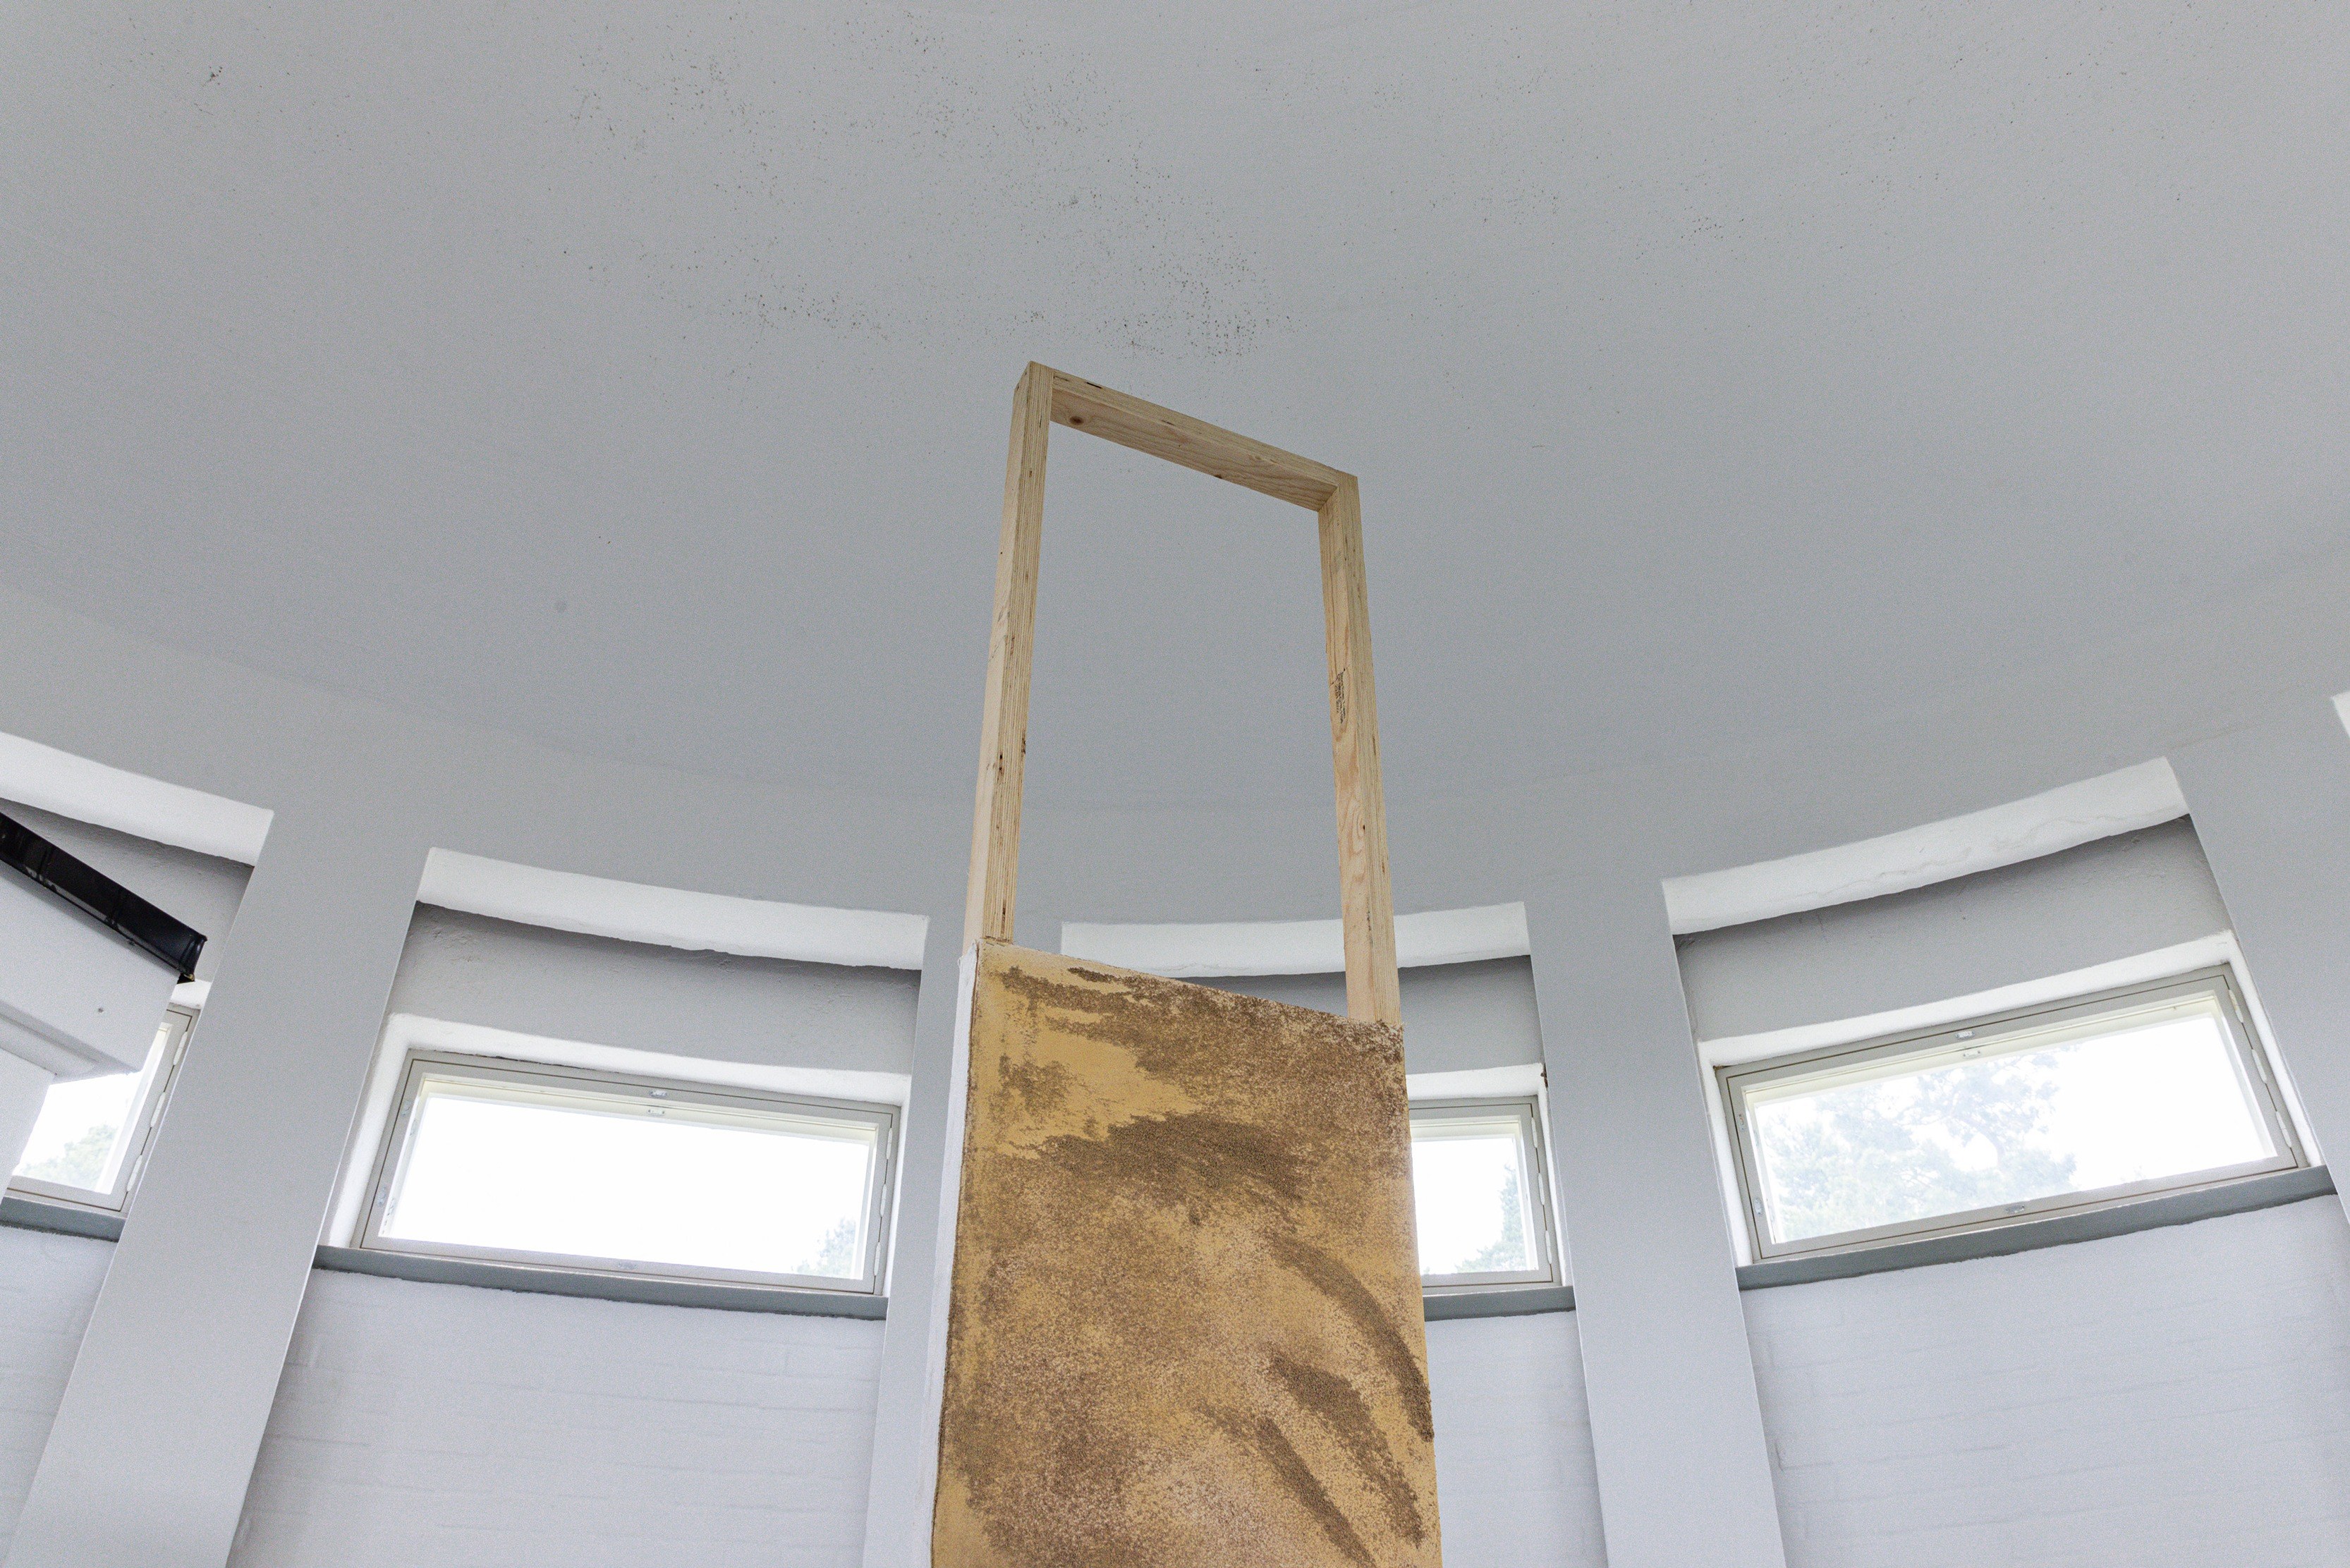 Emelie Luostarinen: 16 million *****, 2022; Canvas, sand (hanko beach), wood, stand oil, oil paint, spray paint, perforated plates and necklace;  360 x 360 x 60 cm 